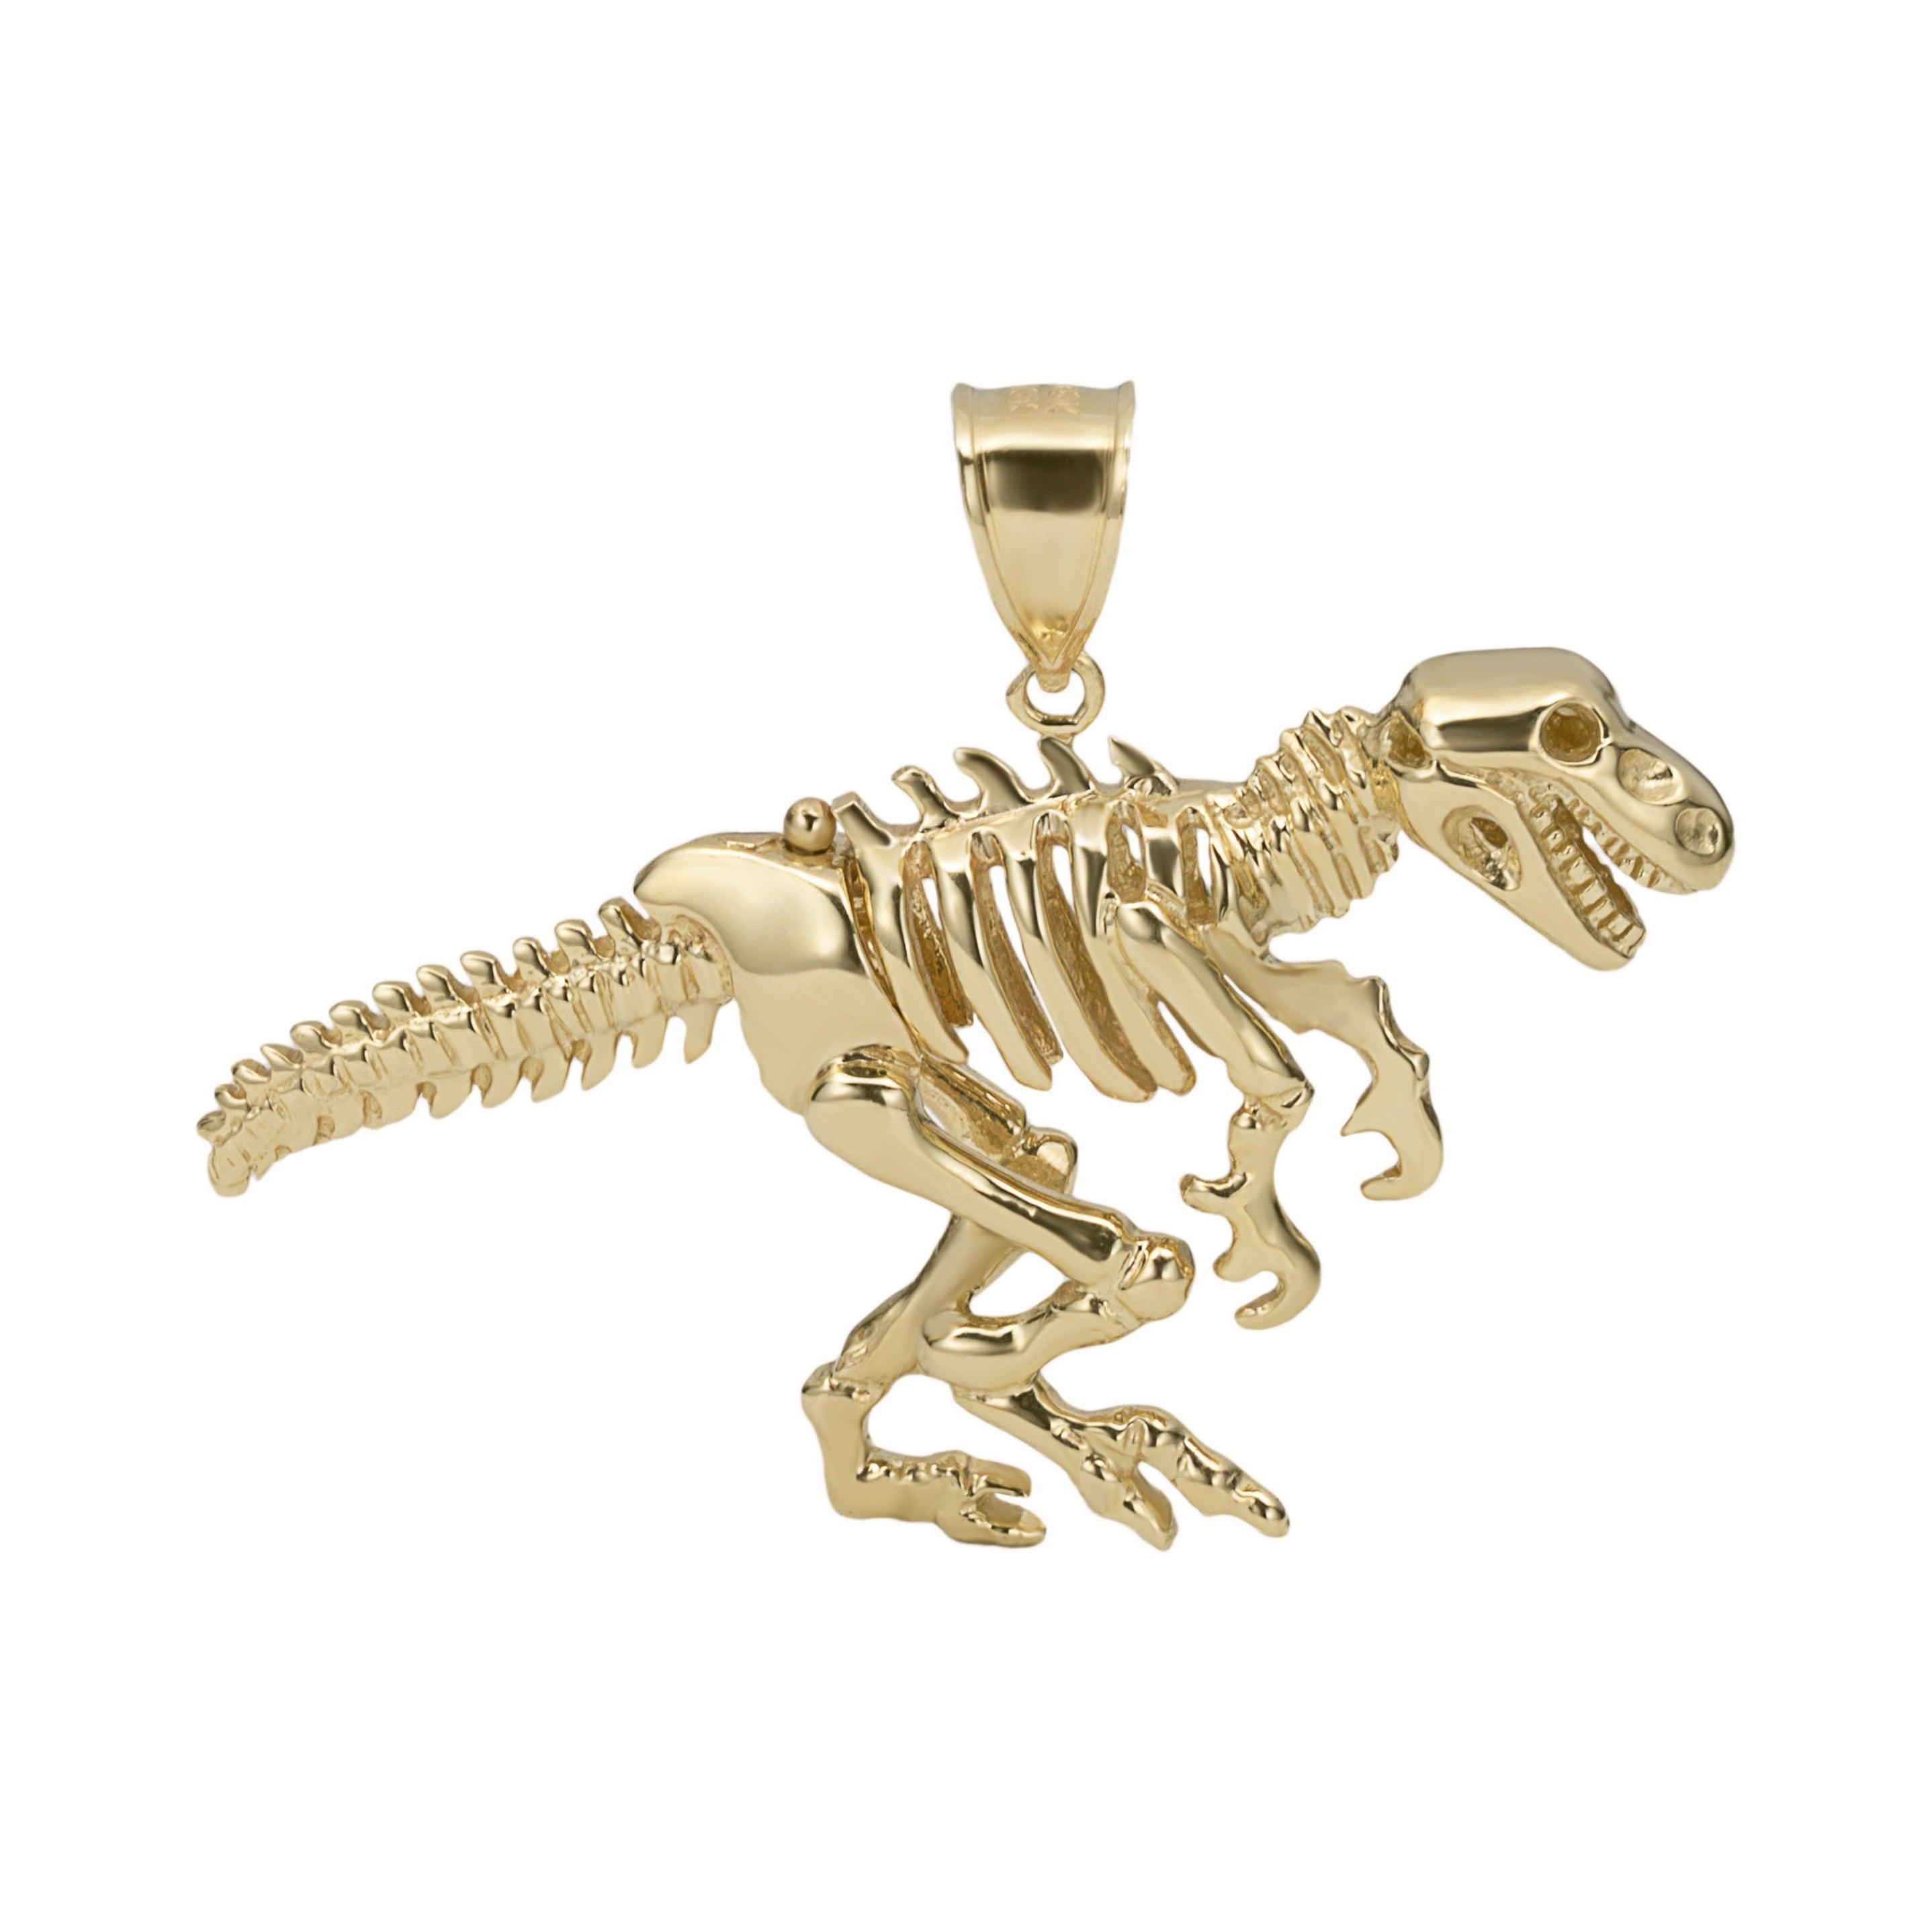 Buy T-rex Dinosaur Necklace in 18ct Gold Plated Sterling Silver, Cute Fun  and Quirky Tyrannosaurus Rex Jewellery, Gold T Rex, Online in India - Etsy